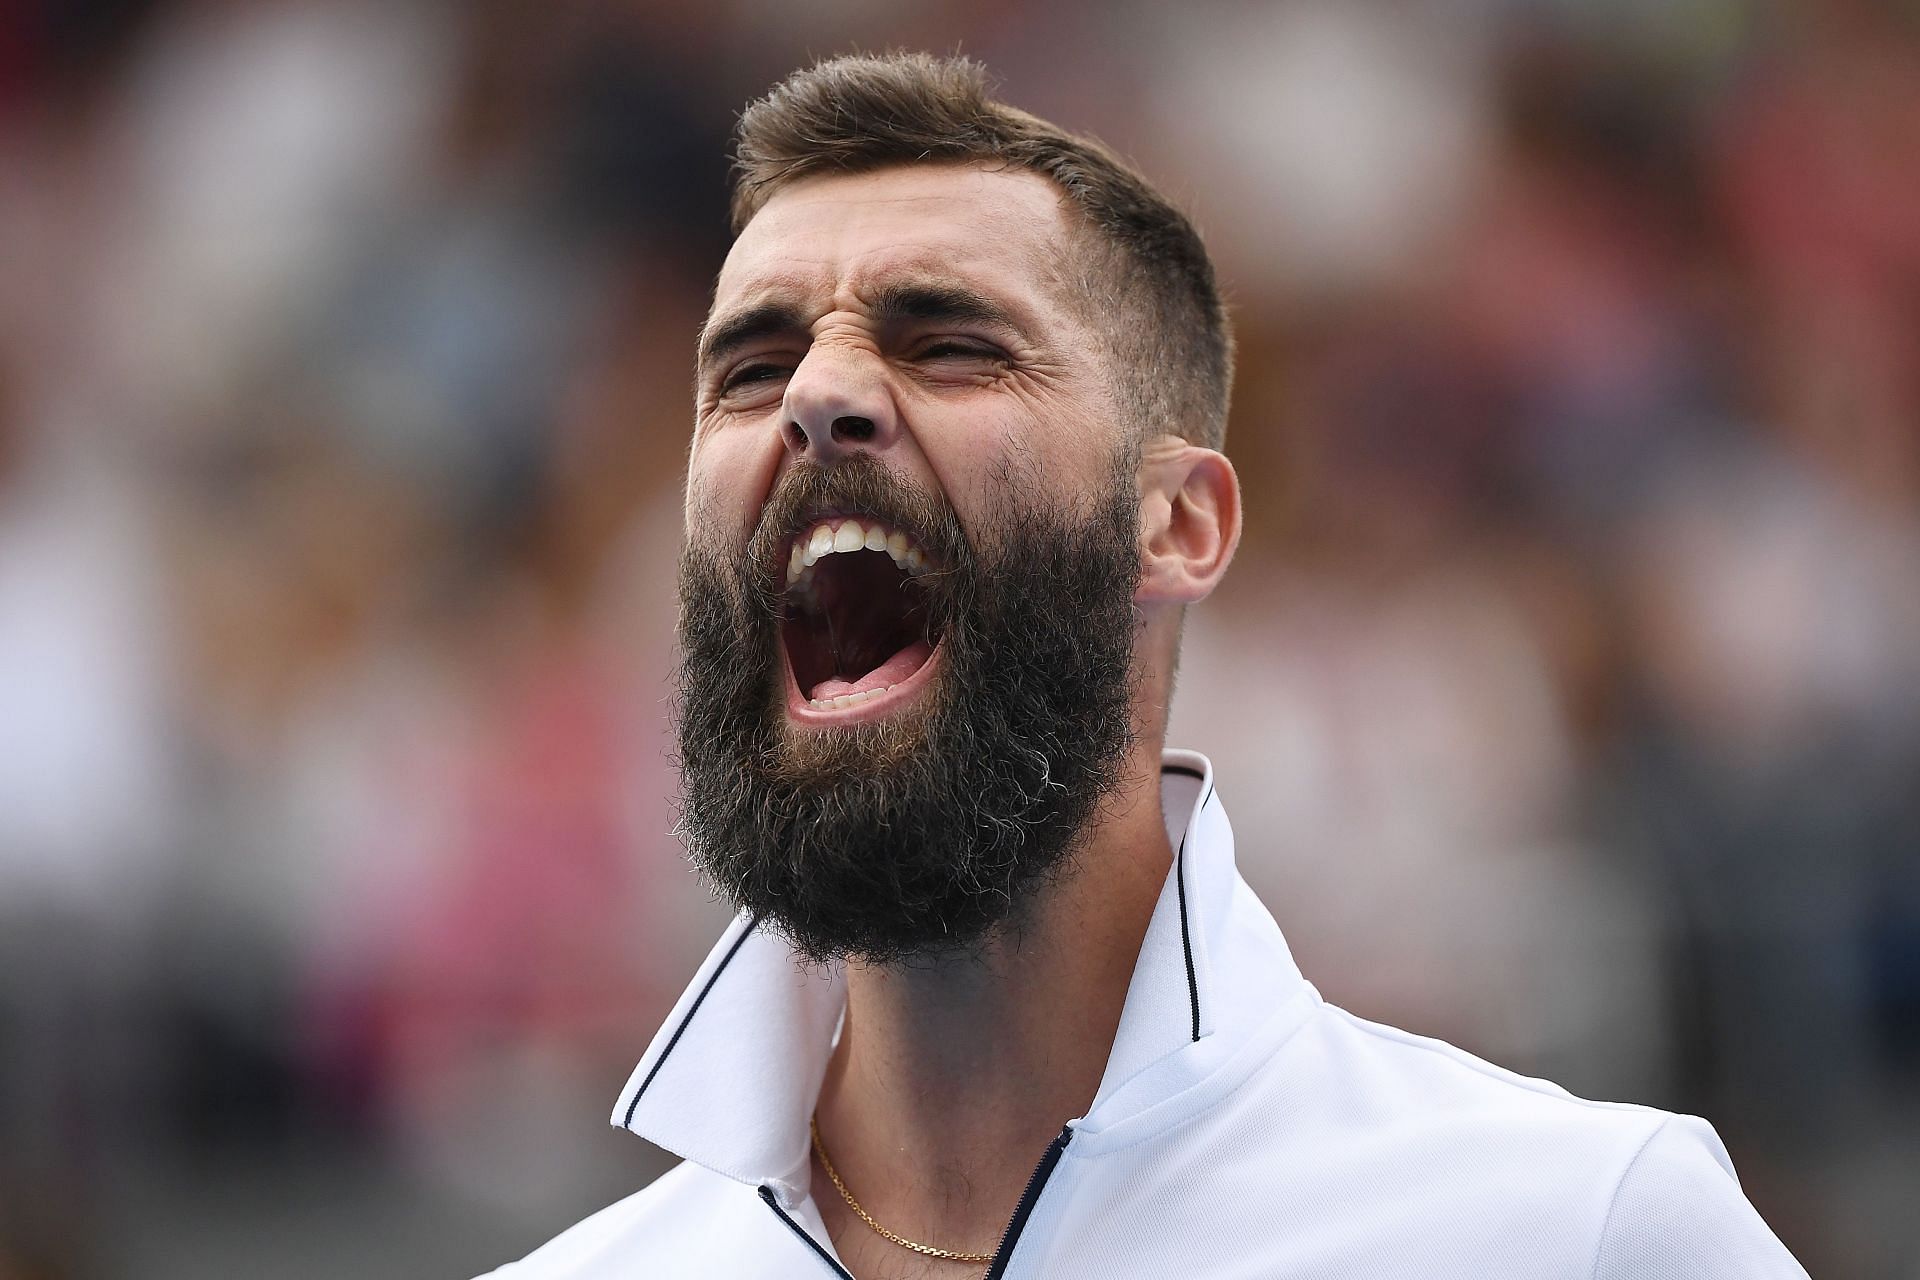 Watch Benoit Paire gets booed during Estoril Open loss, lowers shorts in show of disrespect to the fans